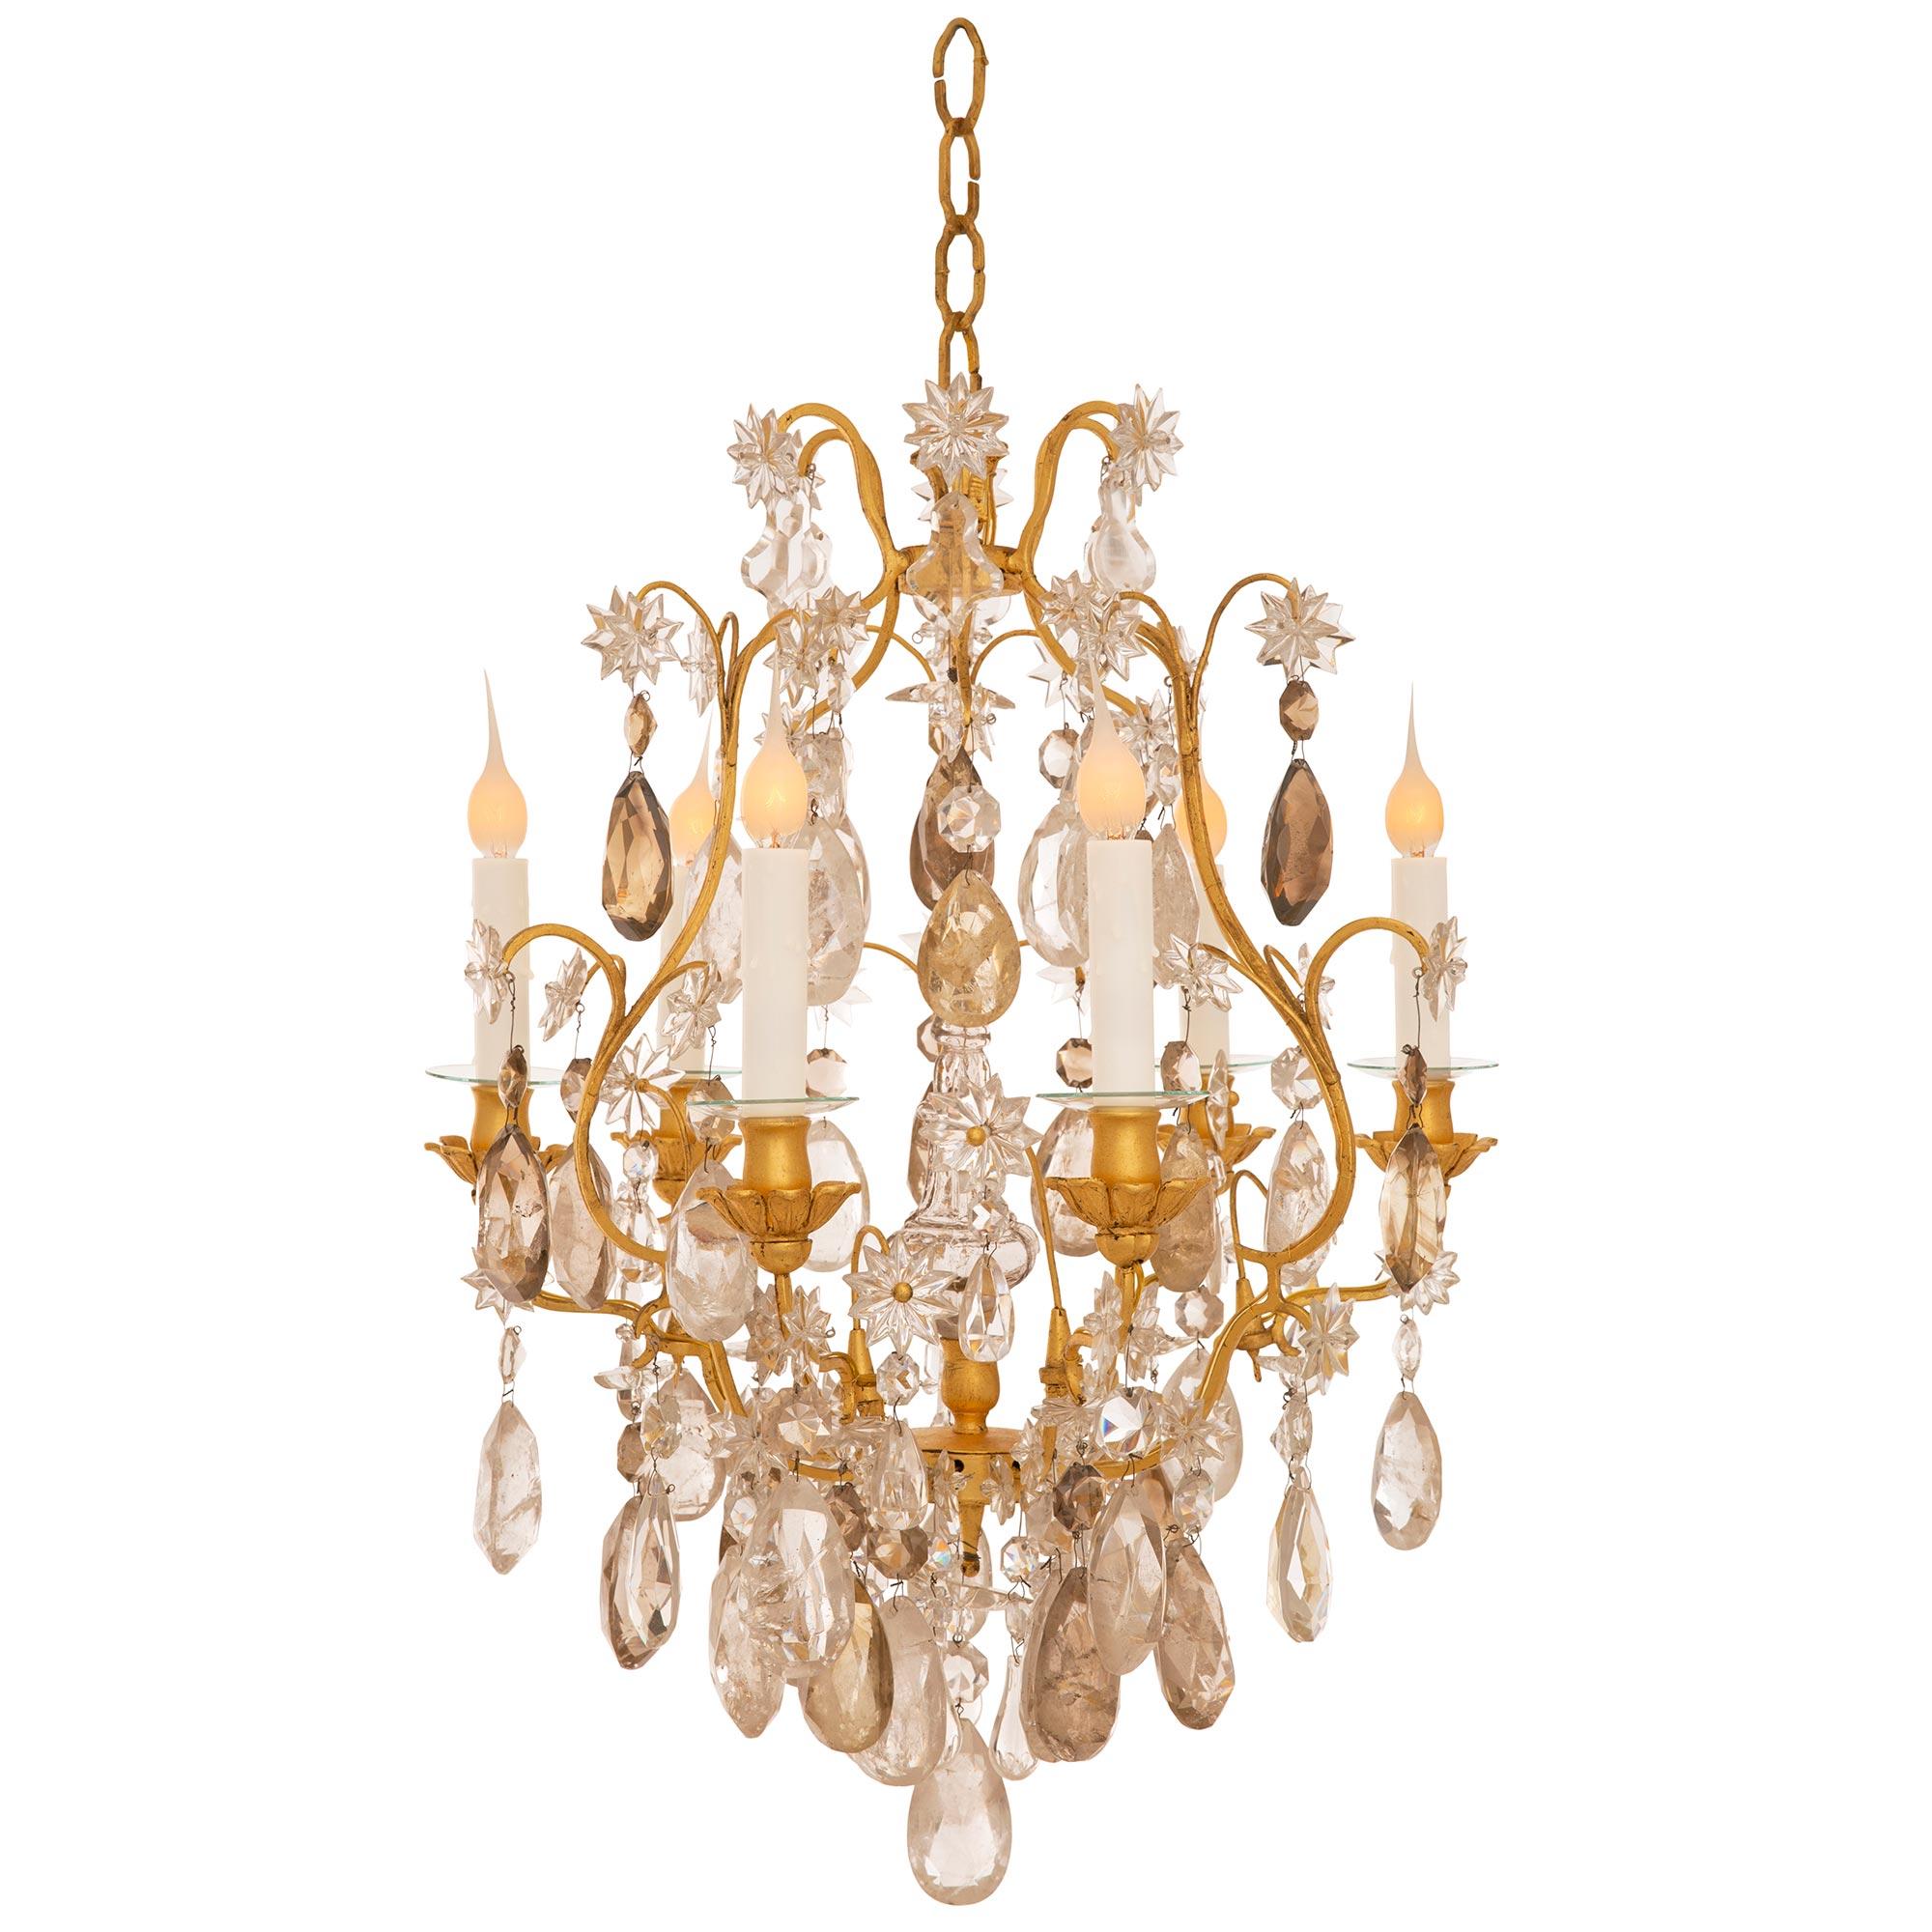 A stunning and very charming French early 19th century Louis XV st. rock crystal and gilt metal chandelier. The six arm chandelier is centered by a unique and most decorative cut oblong shaped rock crystal pendant centered by exceptional teardrop